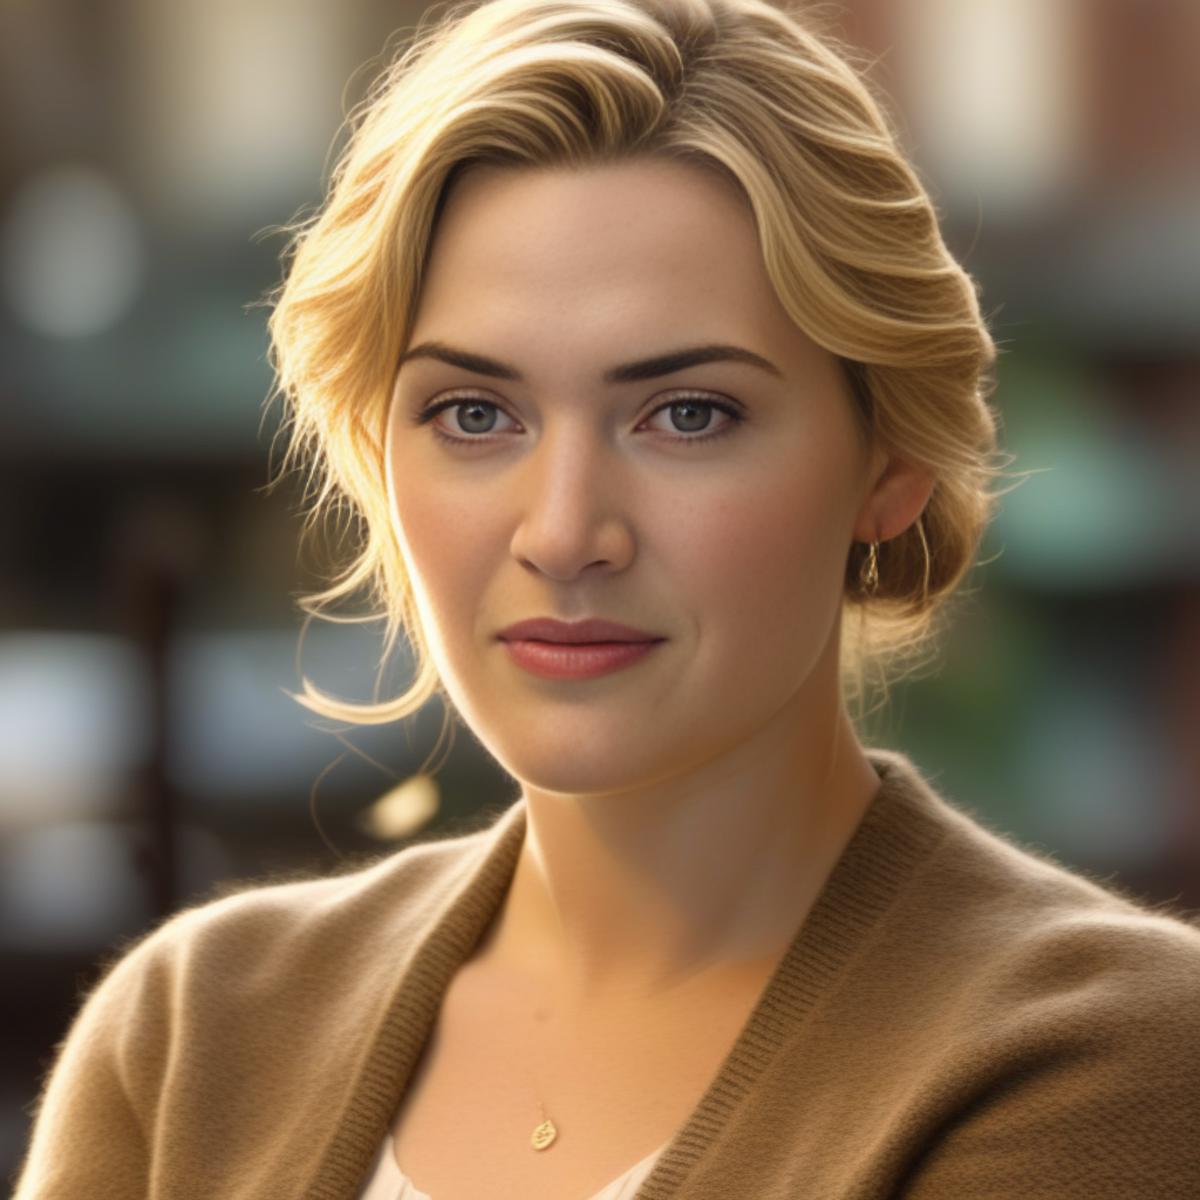 Kate Winslet image by parar20